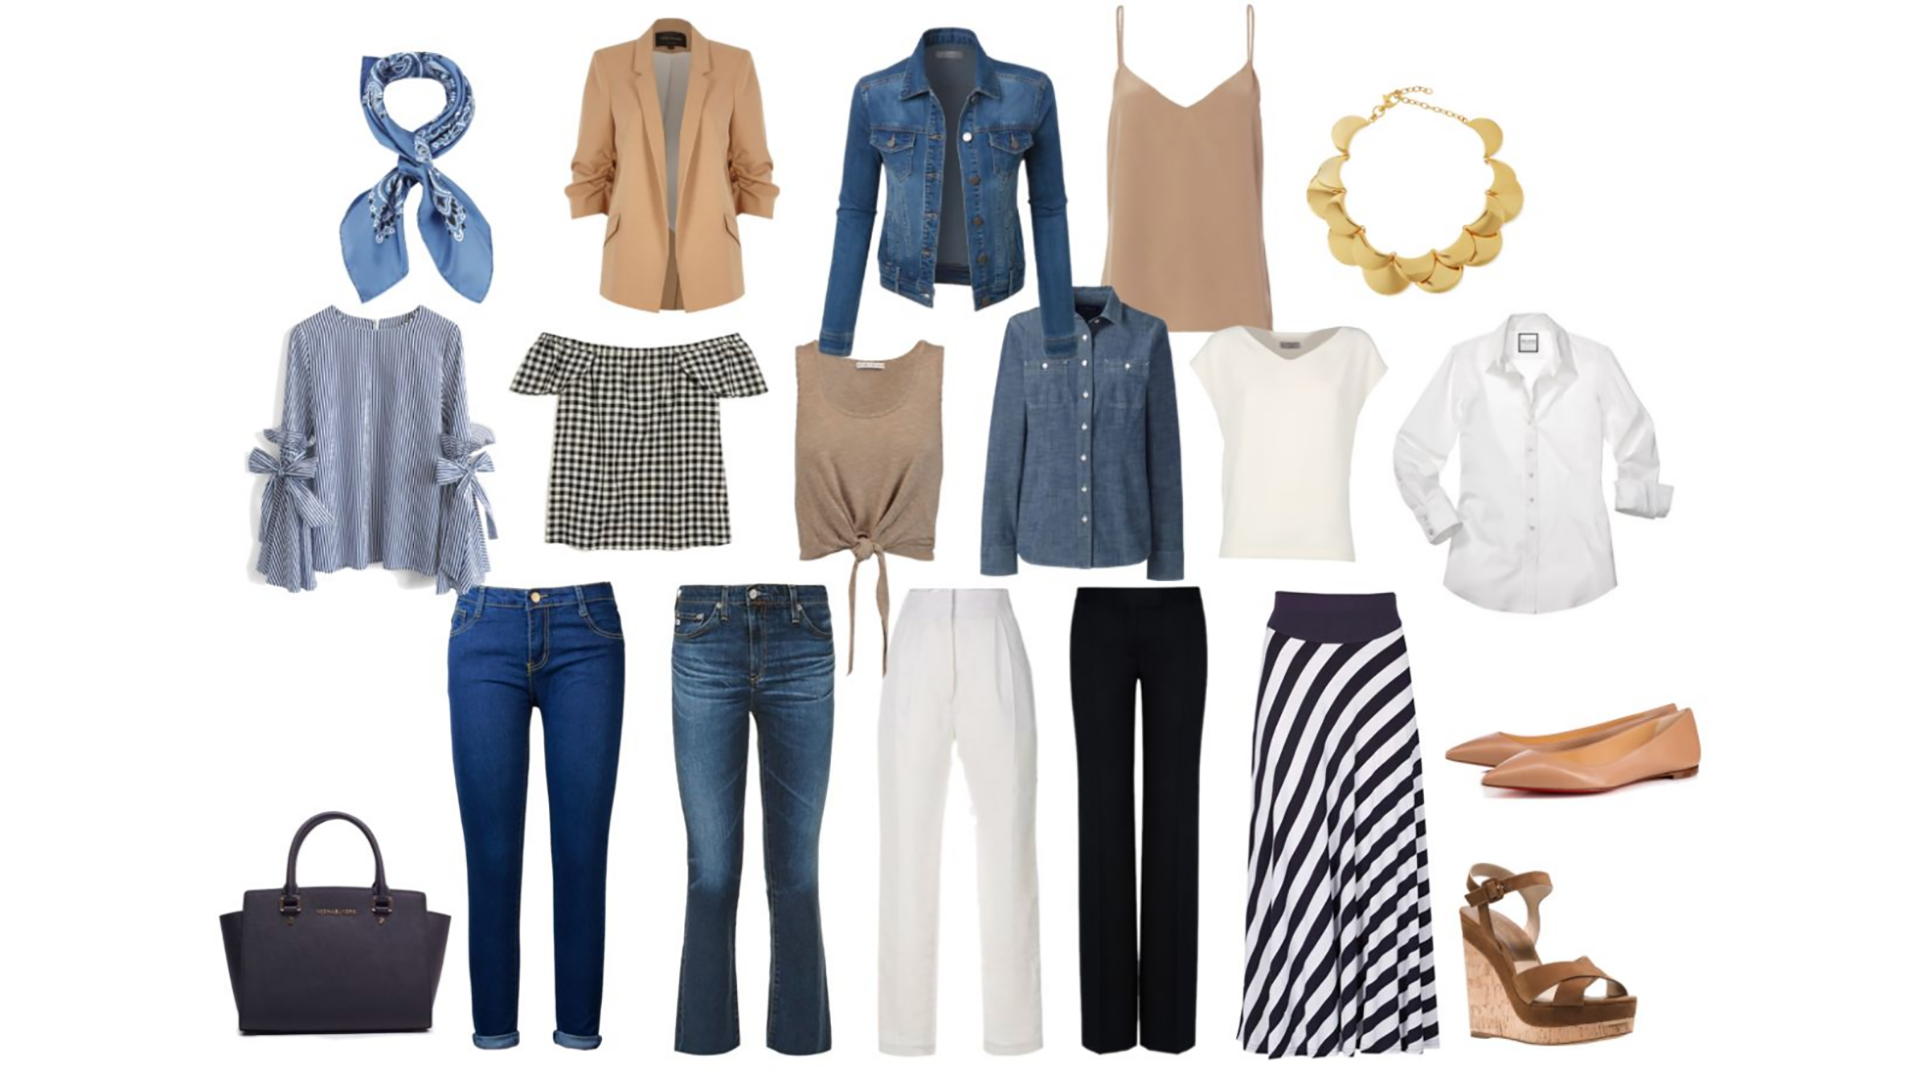 How To Create an All-Neutrals Capsule Wardrobe